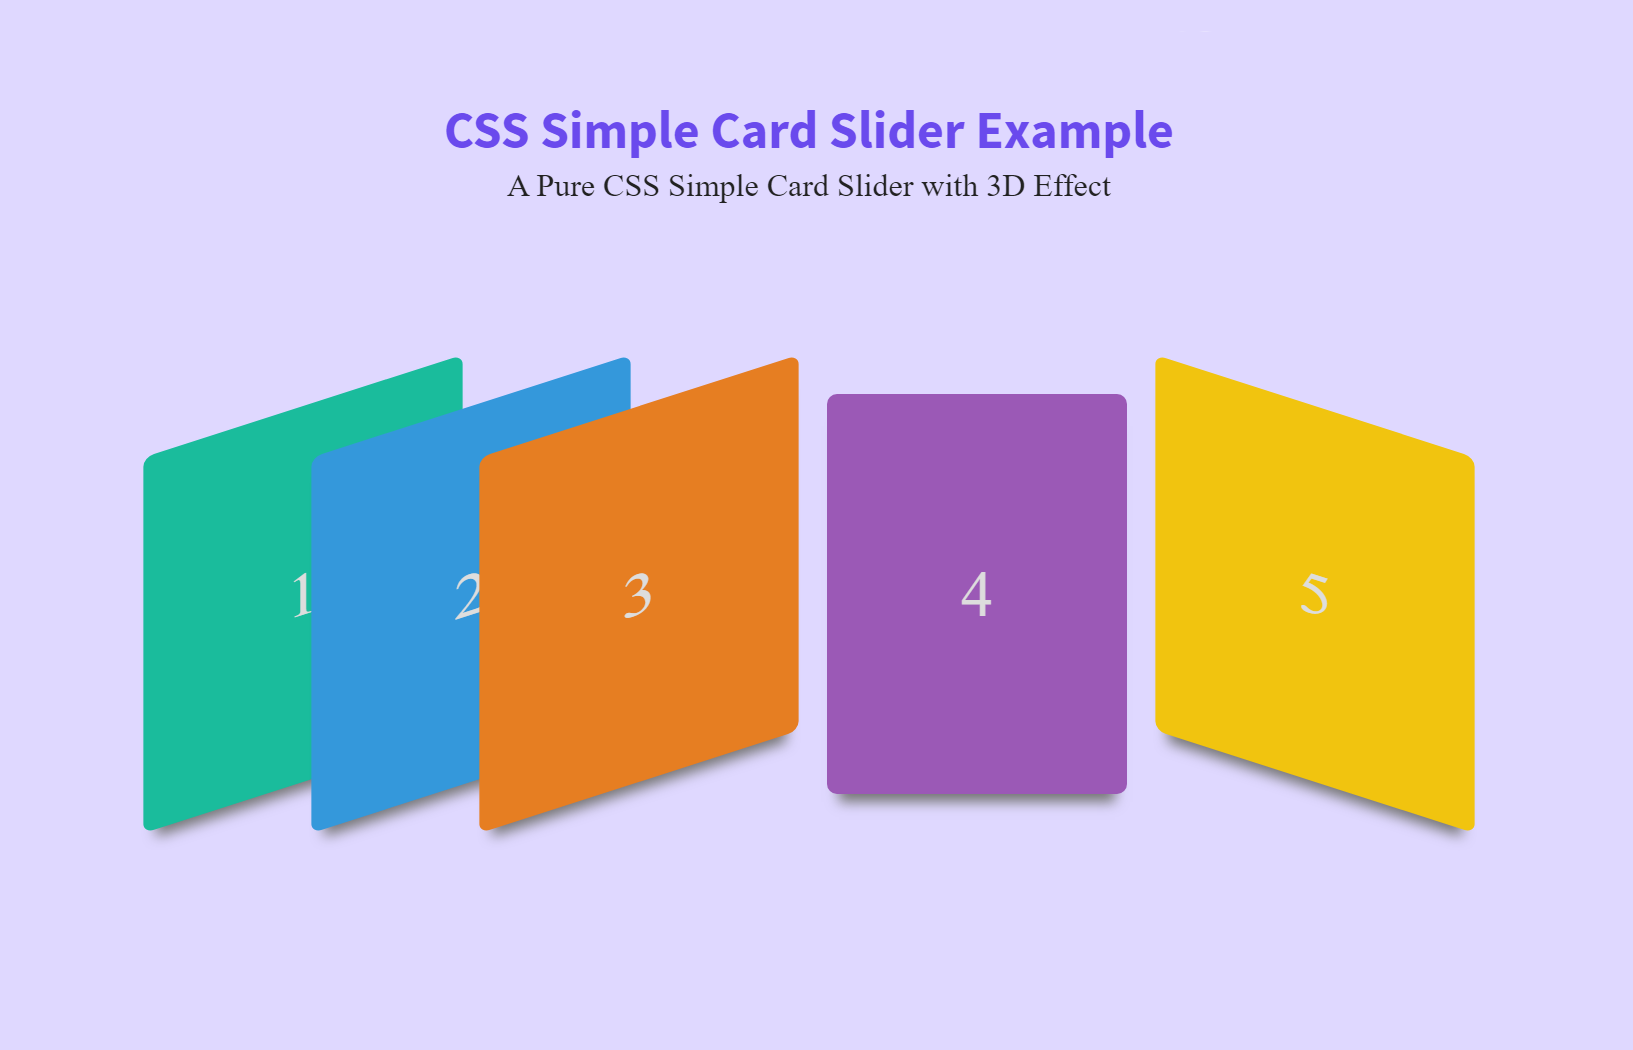 Pure CSS Simple Card Slider with 3D Effect